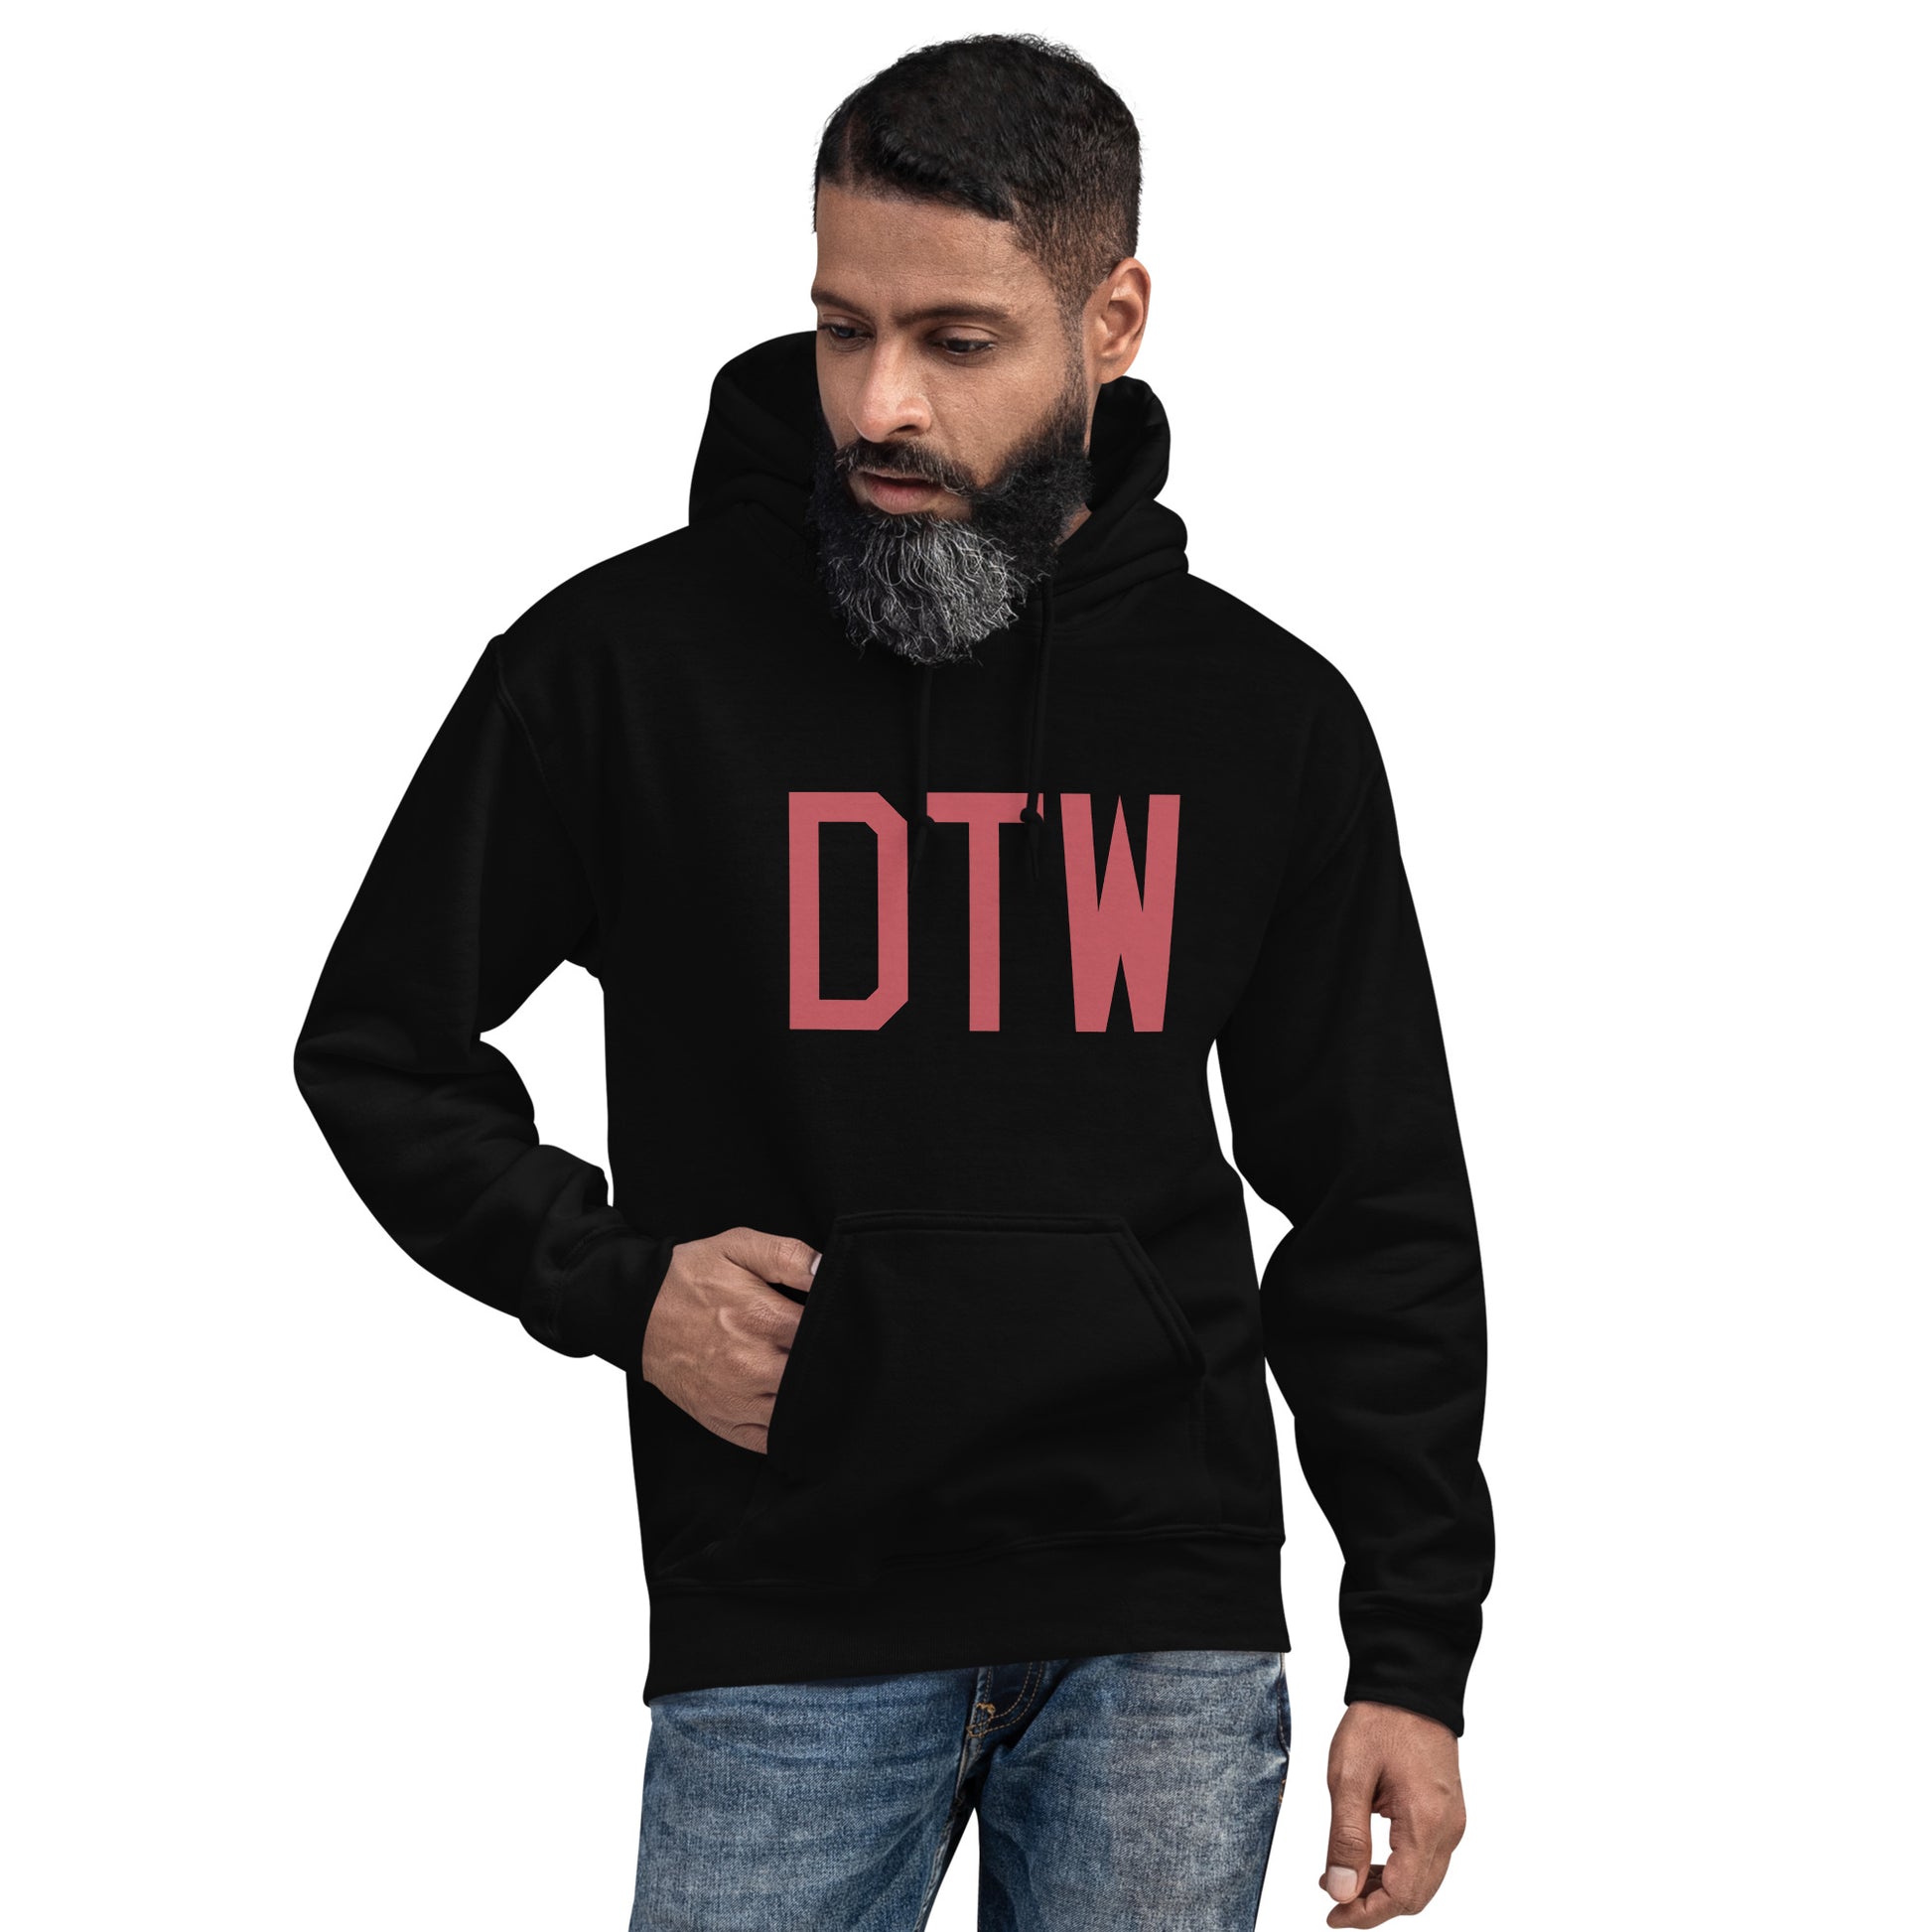 Aviation Enthusiast Hoodie - Deep Pink Graphic • DTW Detroit • YHM Designs - Image 05